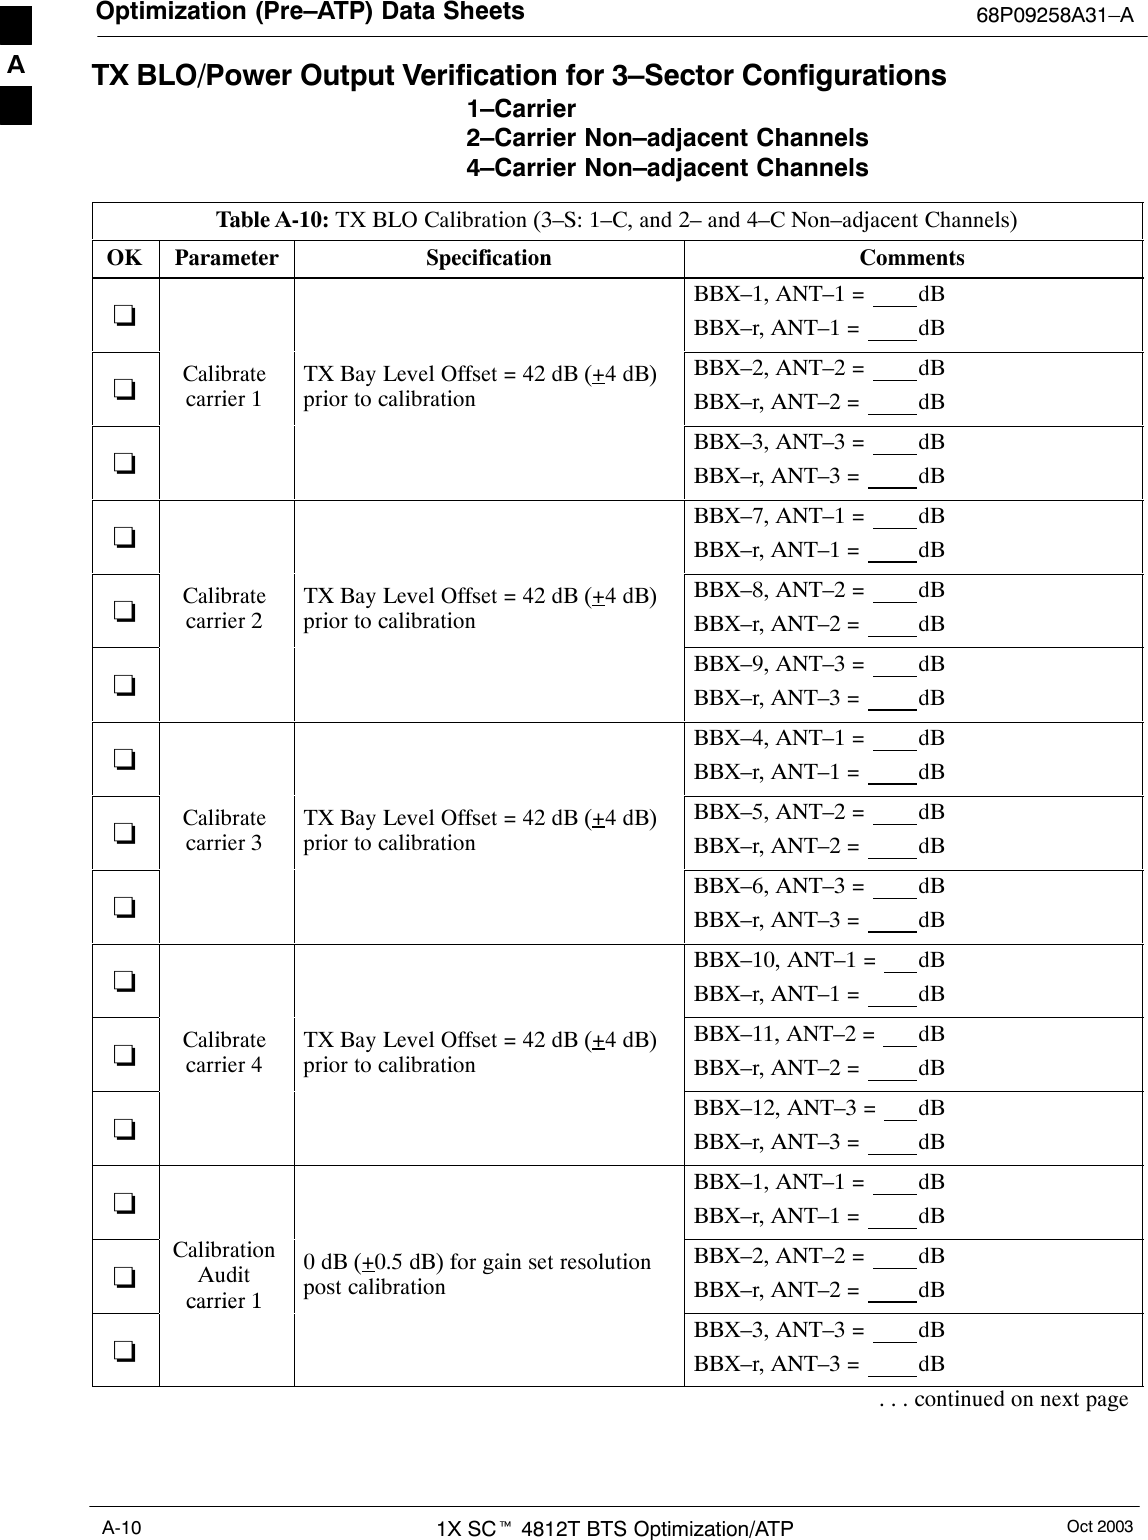 Optimization (Pre–ATP) Data Sheets 68P09258A31–AOct 20031X SCt 4812T BTS Optimization/ATPA-10TX BLO/Power Output Verification for 3–Sector Configurations1–Carrier2–Carrier Non–adjacent Channels4–Carrier Non–adjacent ChannelsTable A-10: TX BLO Calibration (3–S: 1–C, and 2– and 4–C Non–adjacent Channels)OK Parameter Specification Comments−BBX–1, ANT–1 =  dBBBX–r, ANT–1 =  dB−Calibratecarrier 1TX Bay Level Offset = 42 dB (+4 dB)prior to calibrationBBX–2, ANT–2 =  dBBBX–r, ANT–2 =  dB−BBX–3, ANT–3 =  dBBBX–r, ANT–3 =  dB−BBX–7, ANT–1 =  dBBBX–r, ANT–1 =  dB−Calibratecarrier 2TX Bay Level Offset = 42 dB (+4 dB)prior to calibrationBBX–8, ANT–2 =  dBBBX–r, ANT–2 =  dB−BBX–9, ANT–3 =  dBBBX–r, ANT–3 =  dB−BBX–4, ANT–1 =  dBBBX–r, ANT–1 =  dB−Calibratecarrier 3TX Bay Level Offset = 42 dB (+4 dB)prior to calibrationBBX–5, ANT–2 =  dBBBX–r, ANT–2 =  dB−BBX–6, ANT–3 =  dBBBX–r, ANT–3 =  dB−BBX–10, ANT–1 =  dBBBX–r, ANT–1 =  dB−Calibratecarrier 4TX Bay Level Offset = 42 dB (+4 dB)prior to calibrationBBX–11, ANT–2 =  dBBBX–r, ANT–2 =  dB−BBX–12, ANT–3 =  dBBBX–r, ANT–3 =  dB−BBX–1, ANT–1 =  dBBBX–r, ANT–1 =  dB−CalibrationAuditcarrier 10 dB (+0.5 dB) for gain set resolutionpost calibrationBBX–2, ANT–2 =  dBBBX–r, ANT–2 =  dB−carrier 1BBX–3, ANT–3 =  dBBBX–r, ANT–3 =  dB. . . continued on next pageA